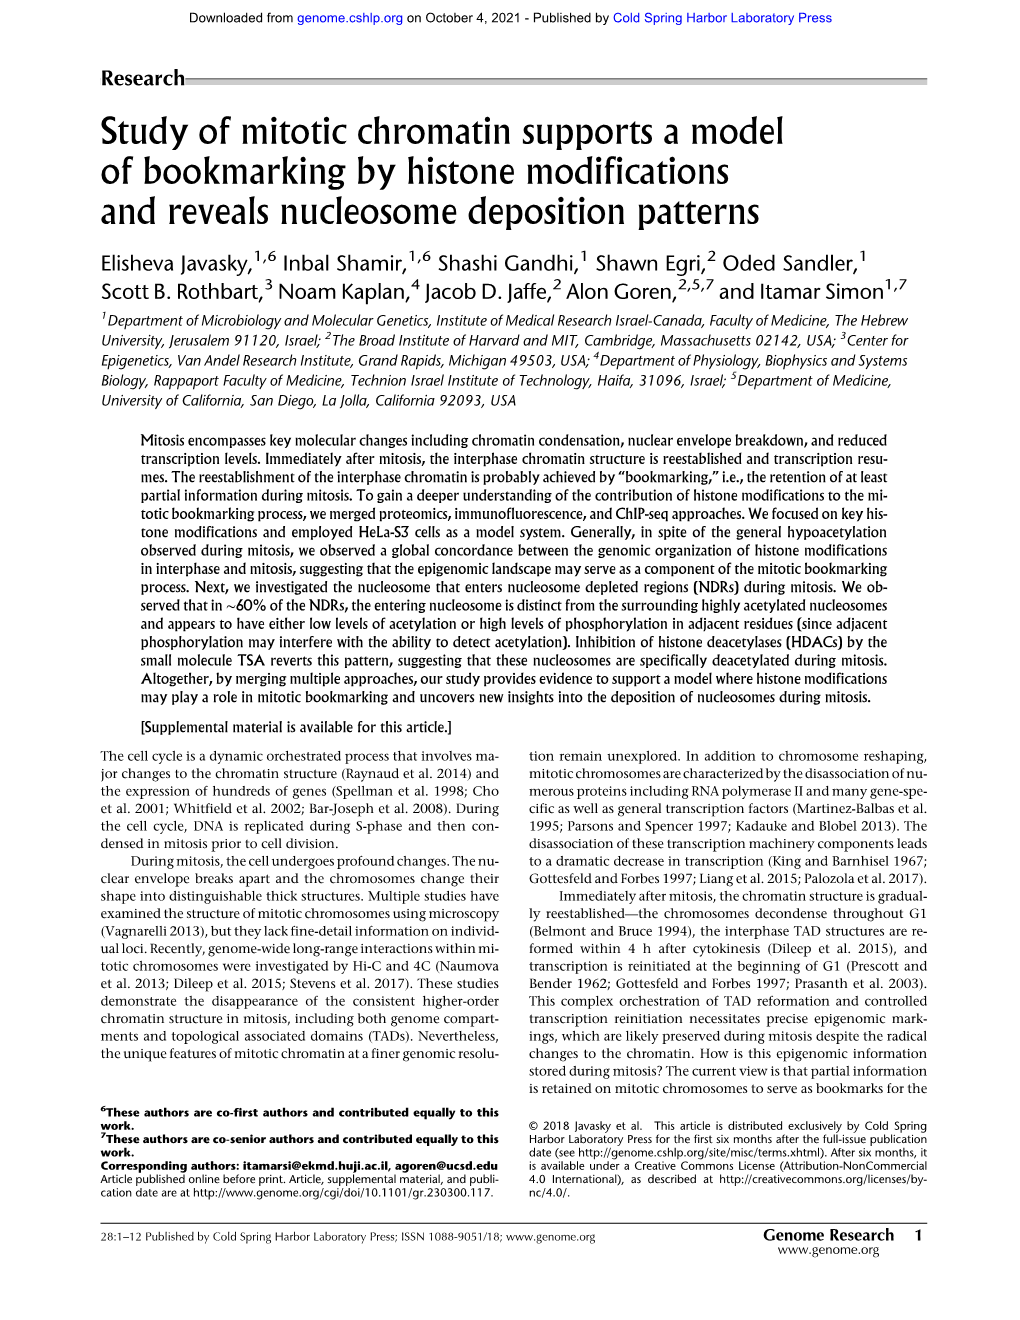 Study of Mitotic Chromatin Supports a Model of Bookmarking by Histone Modifications and Reveals Nucleosome Deposition Patterns